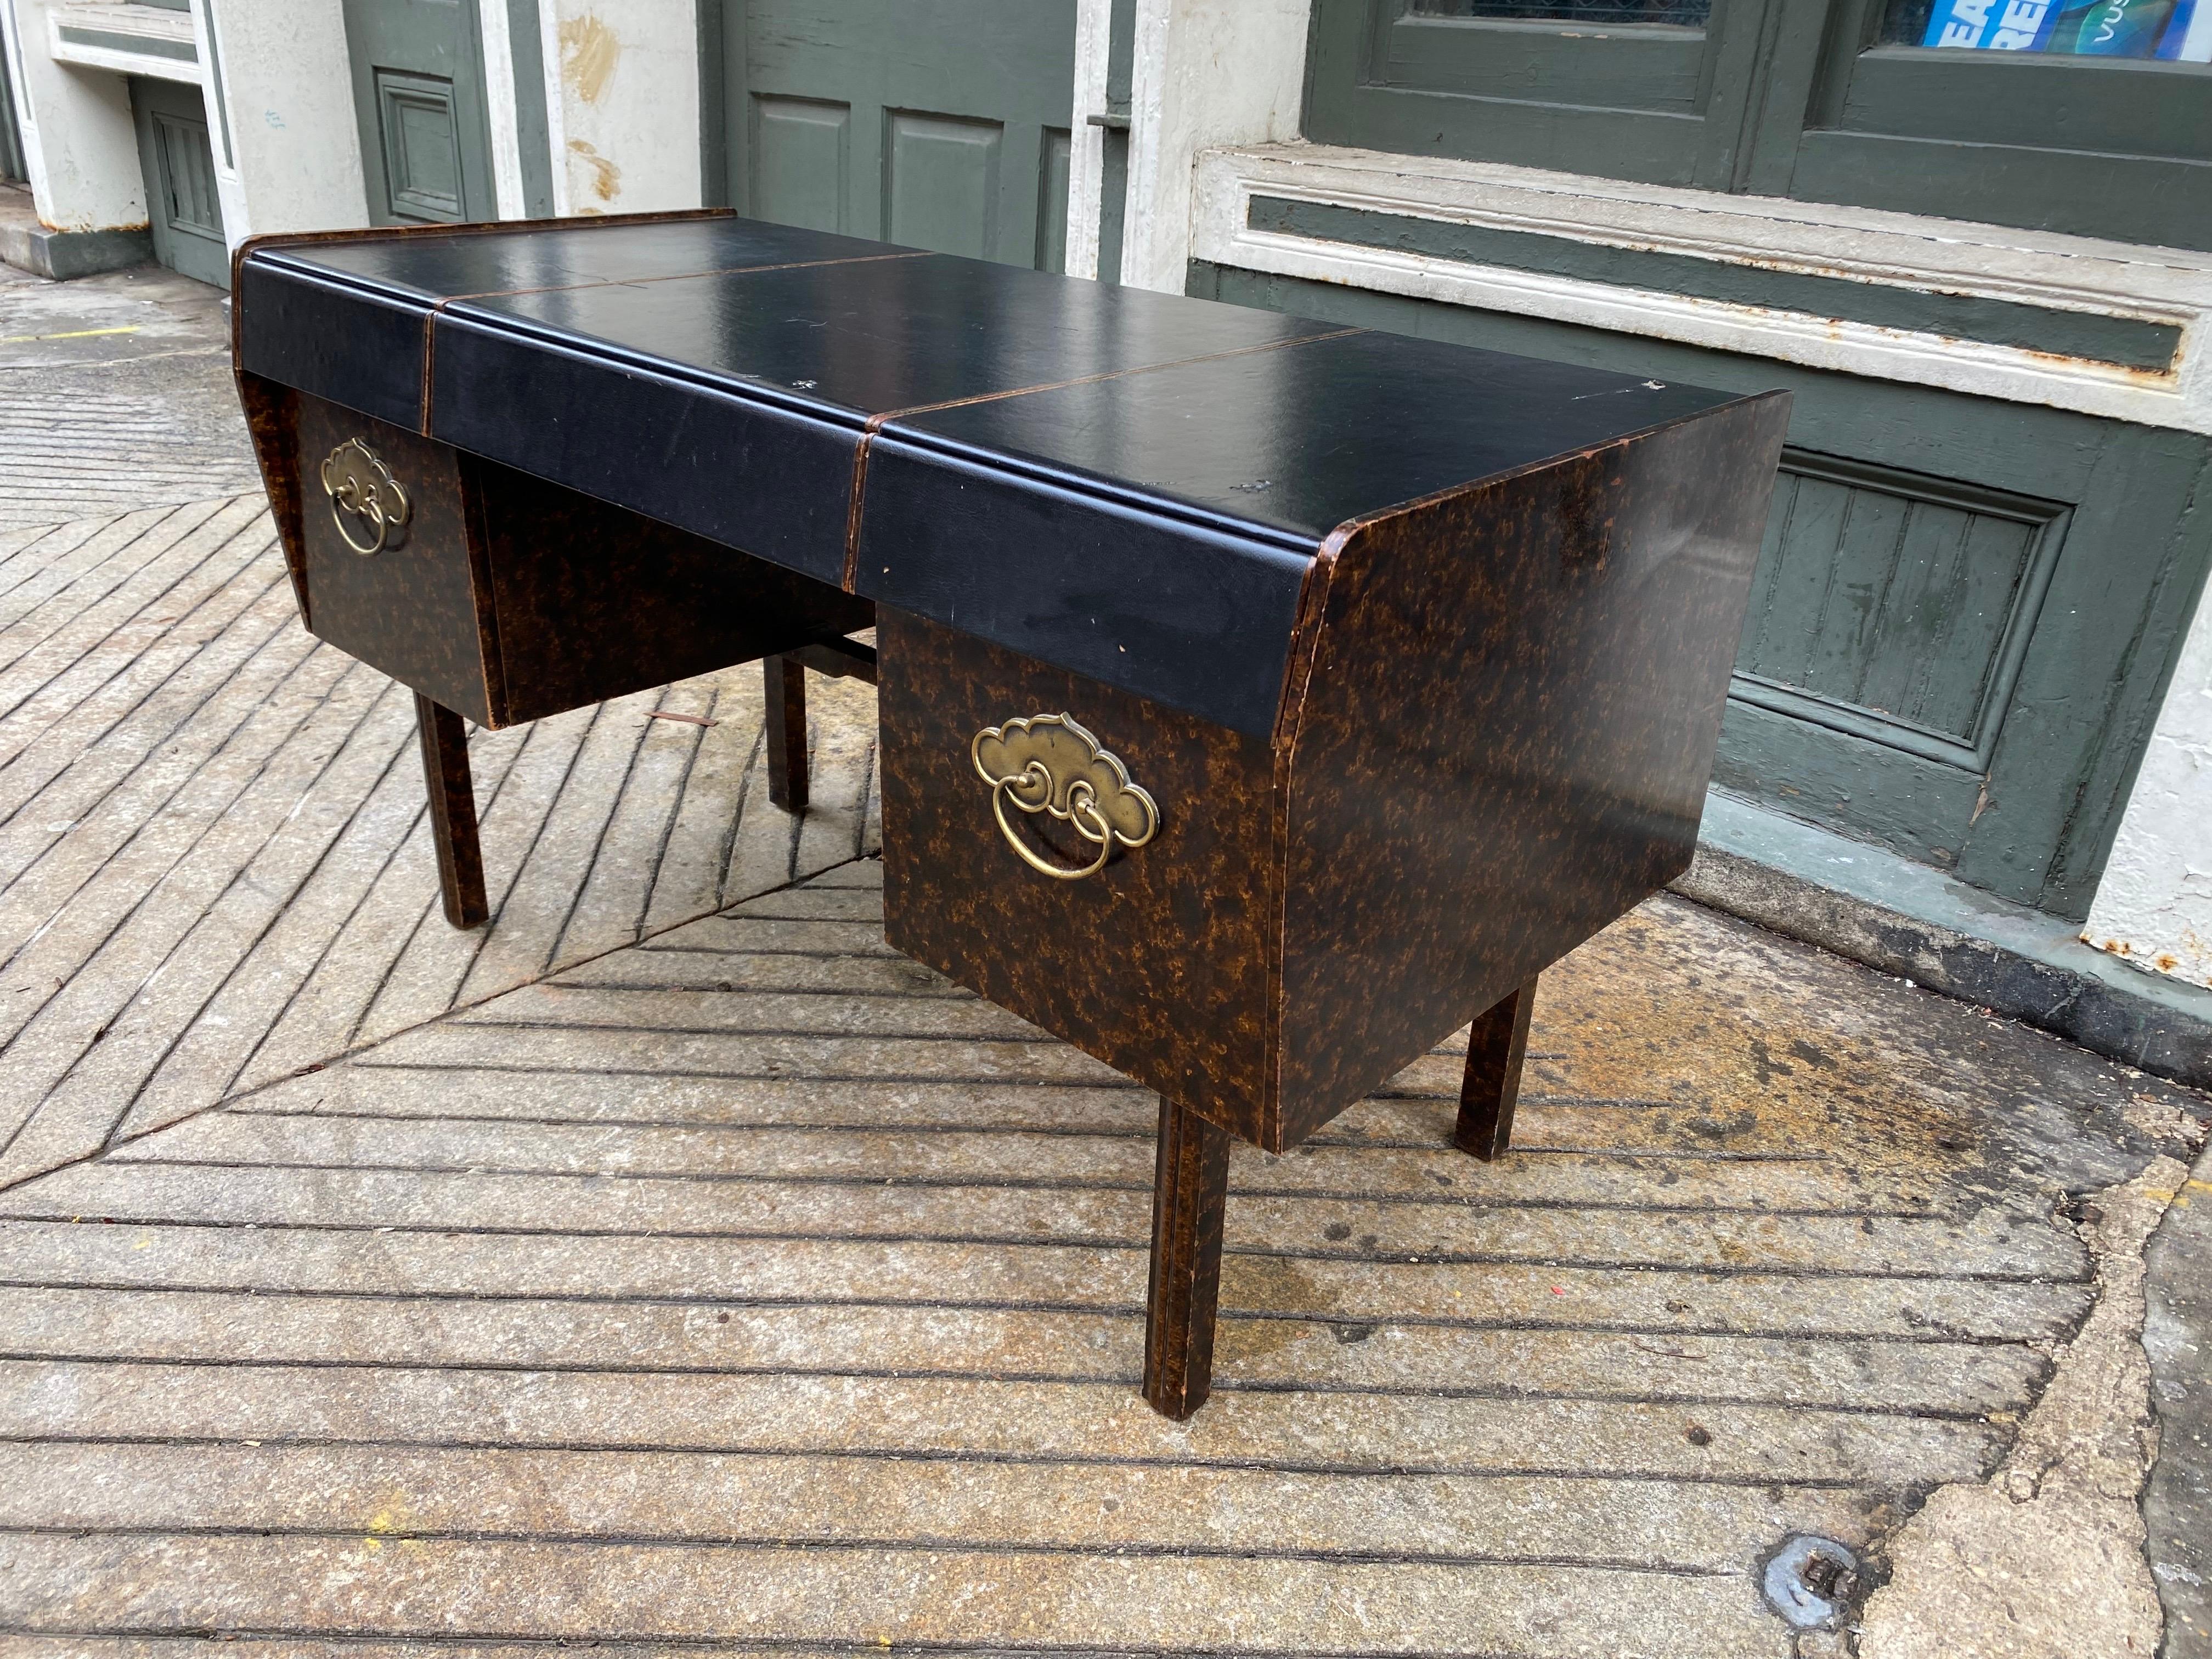 Bert England for John Widdicomb faux-Tourtise shell finish body with a black vinyl work surface and drawer fronts.  Asian inspired brass handles.  Desk is finished on all sides!  Finish shows some light wear and vinyl top shows some damage as seen